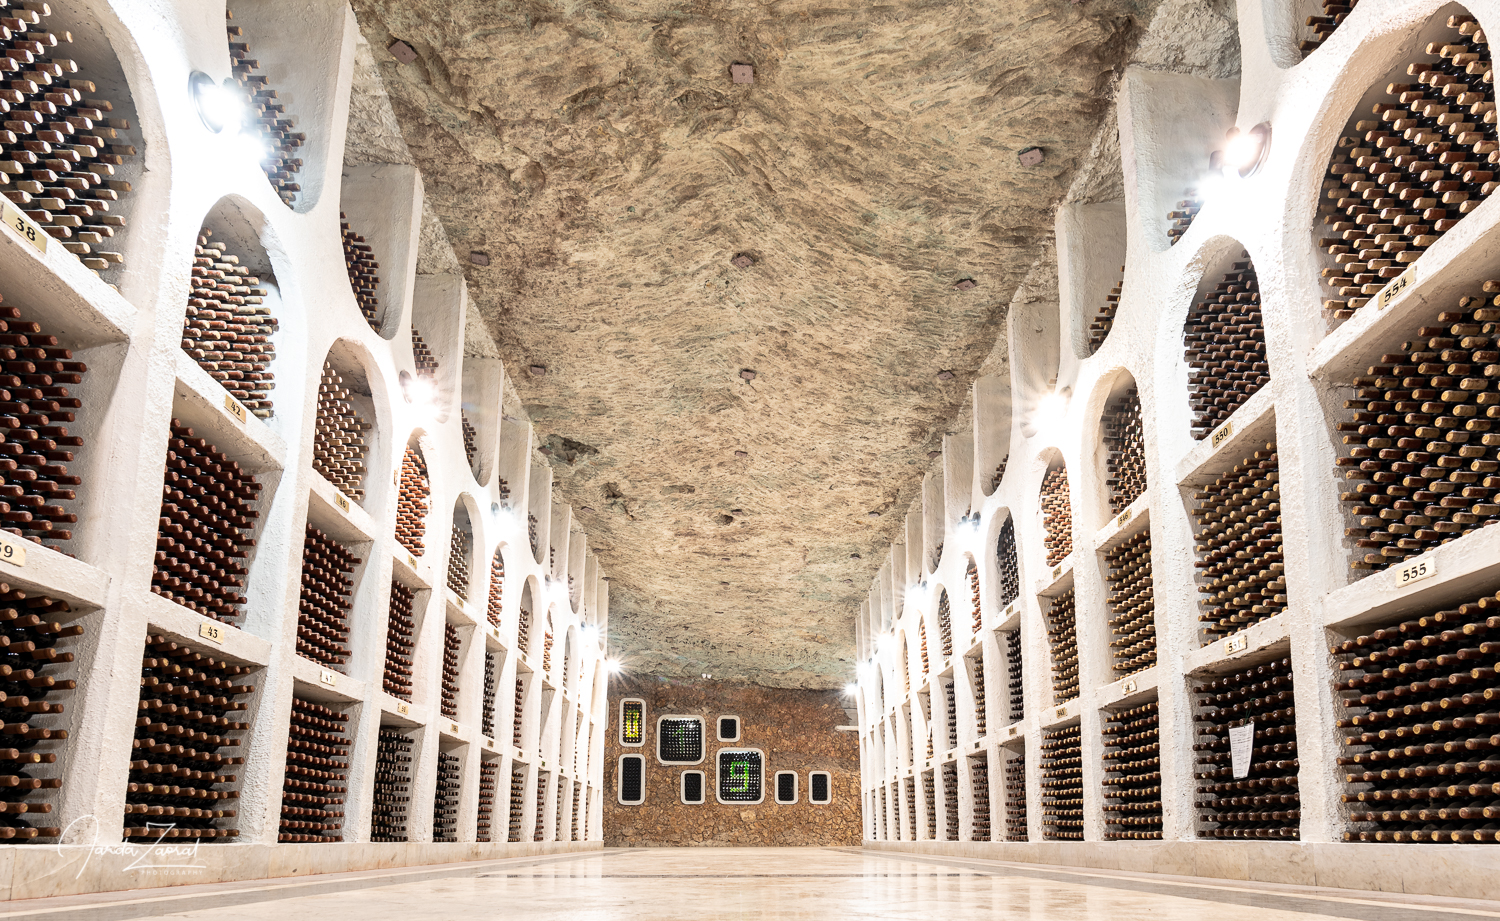 Fancy wines in this underground street of Cricova winery